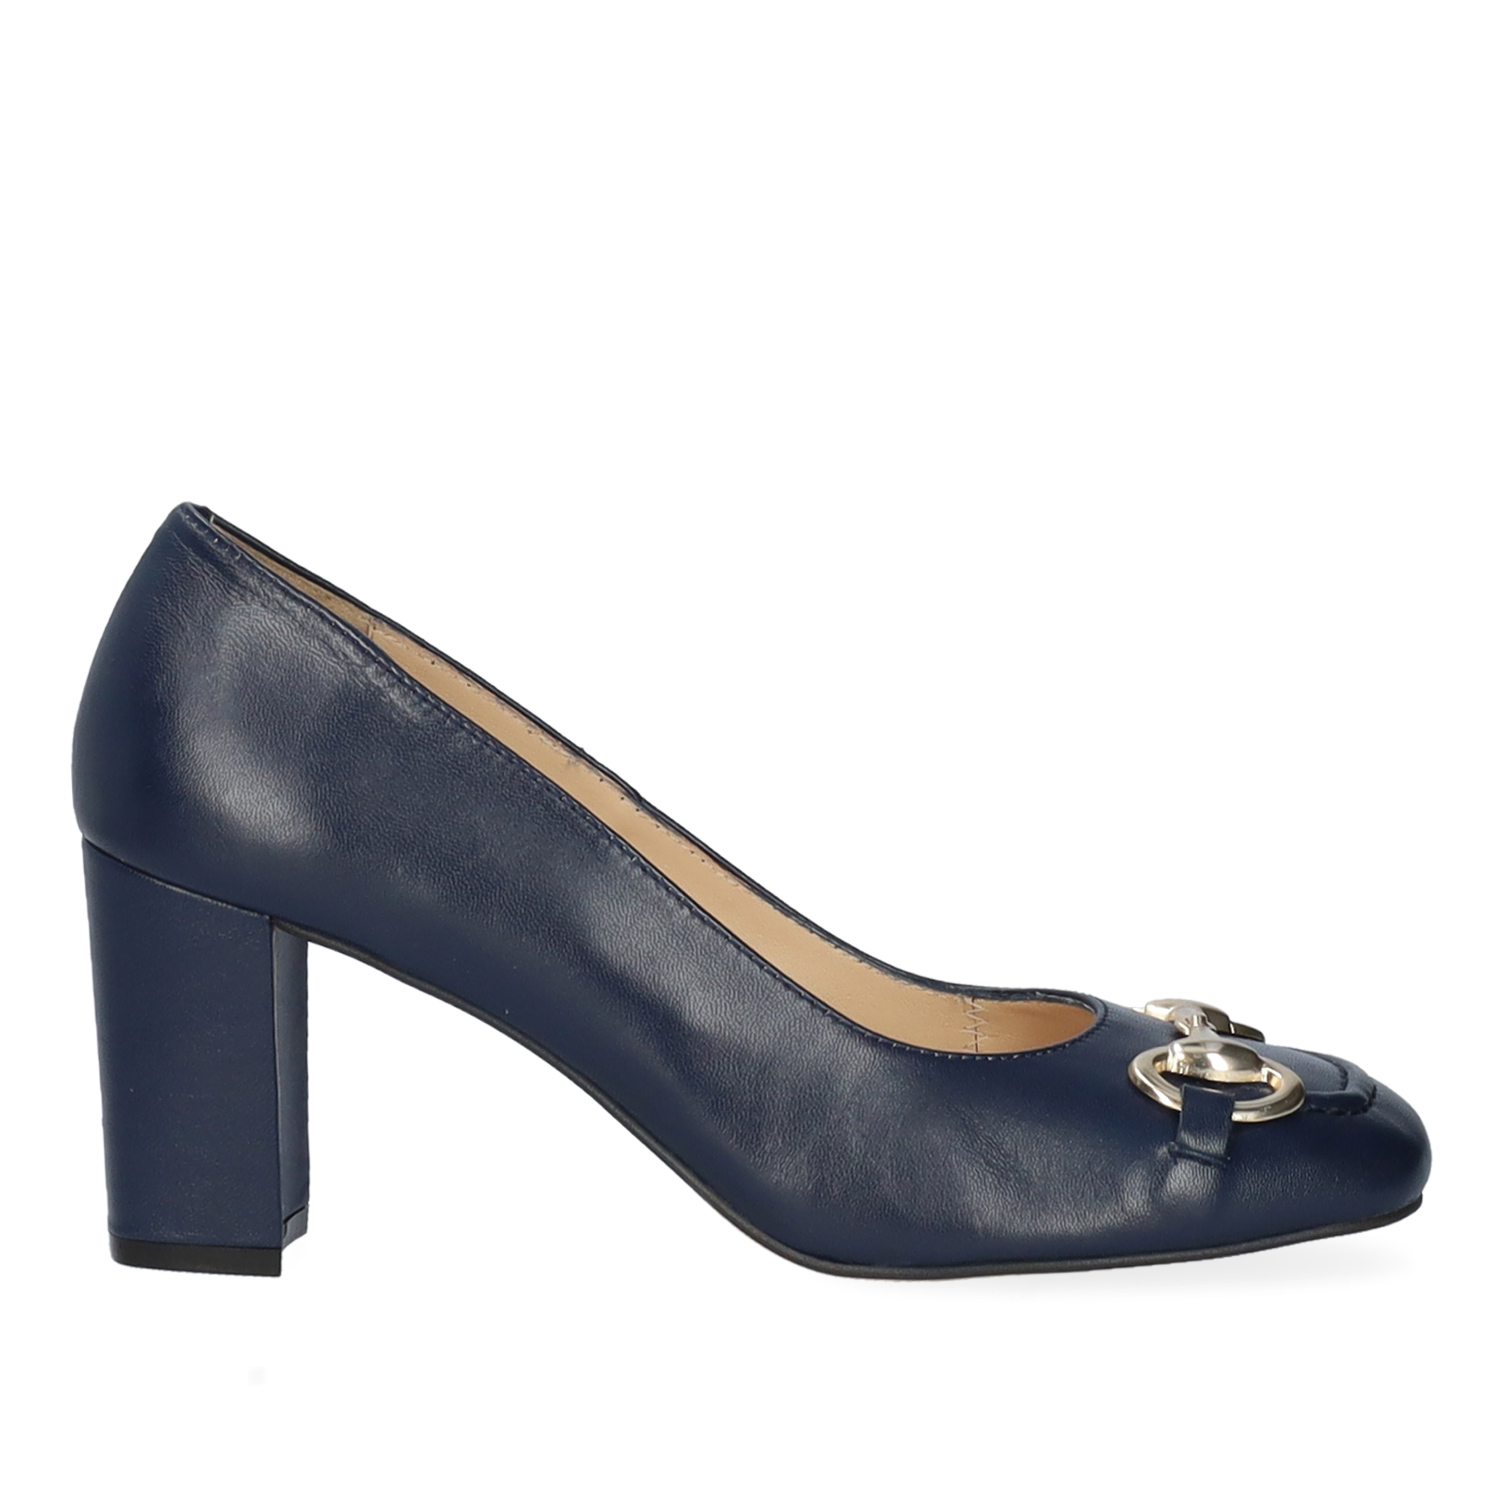 Vintage style heeled shoes in navy leather 